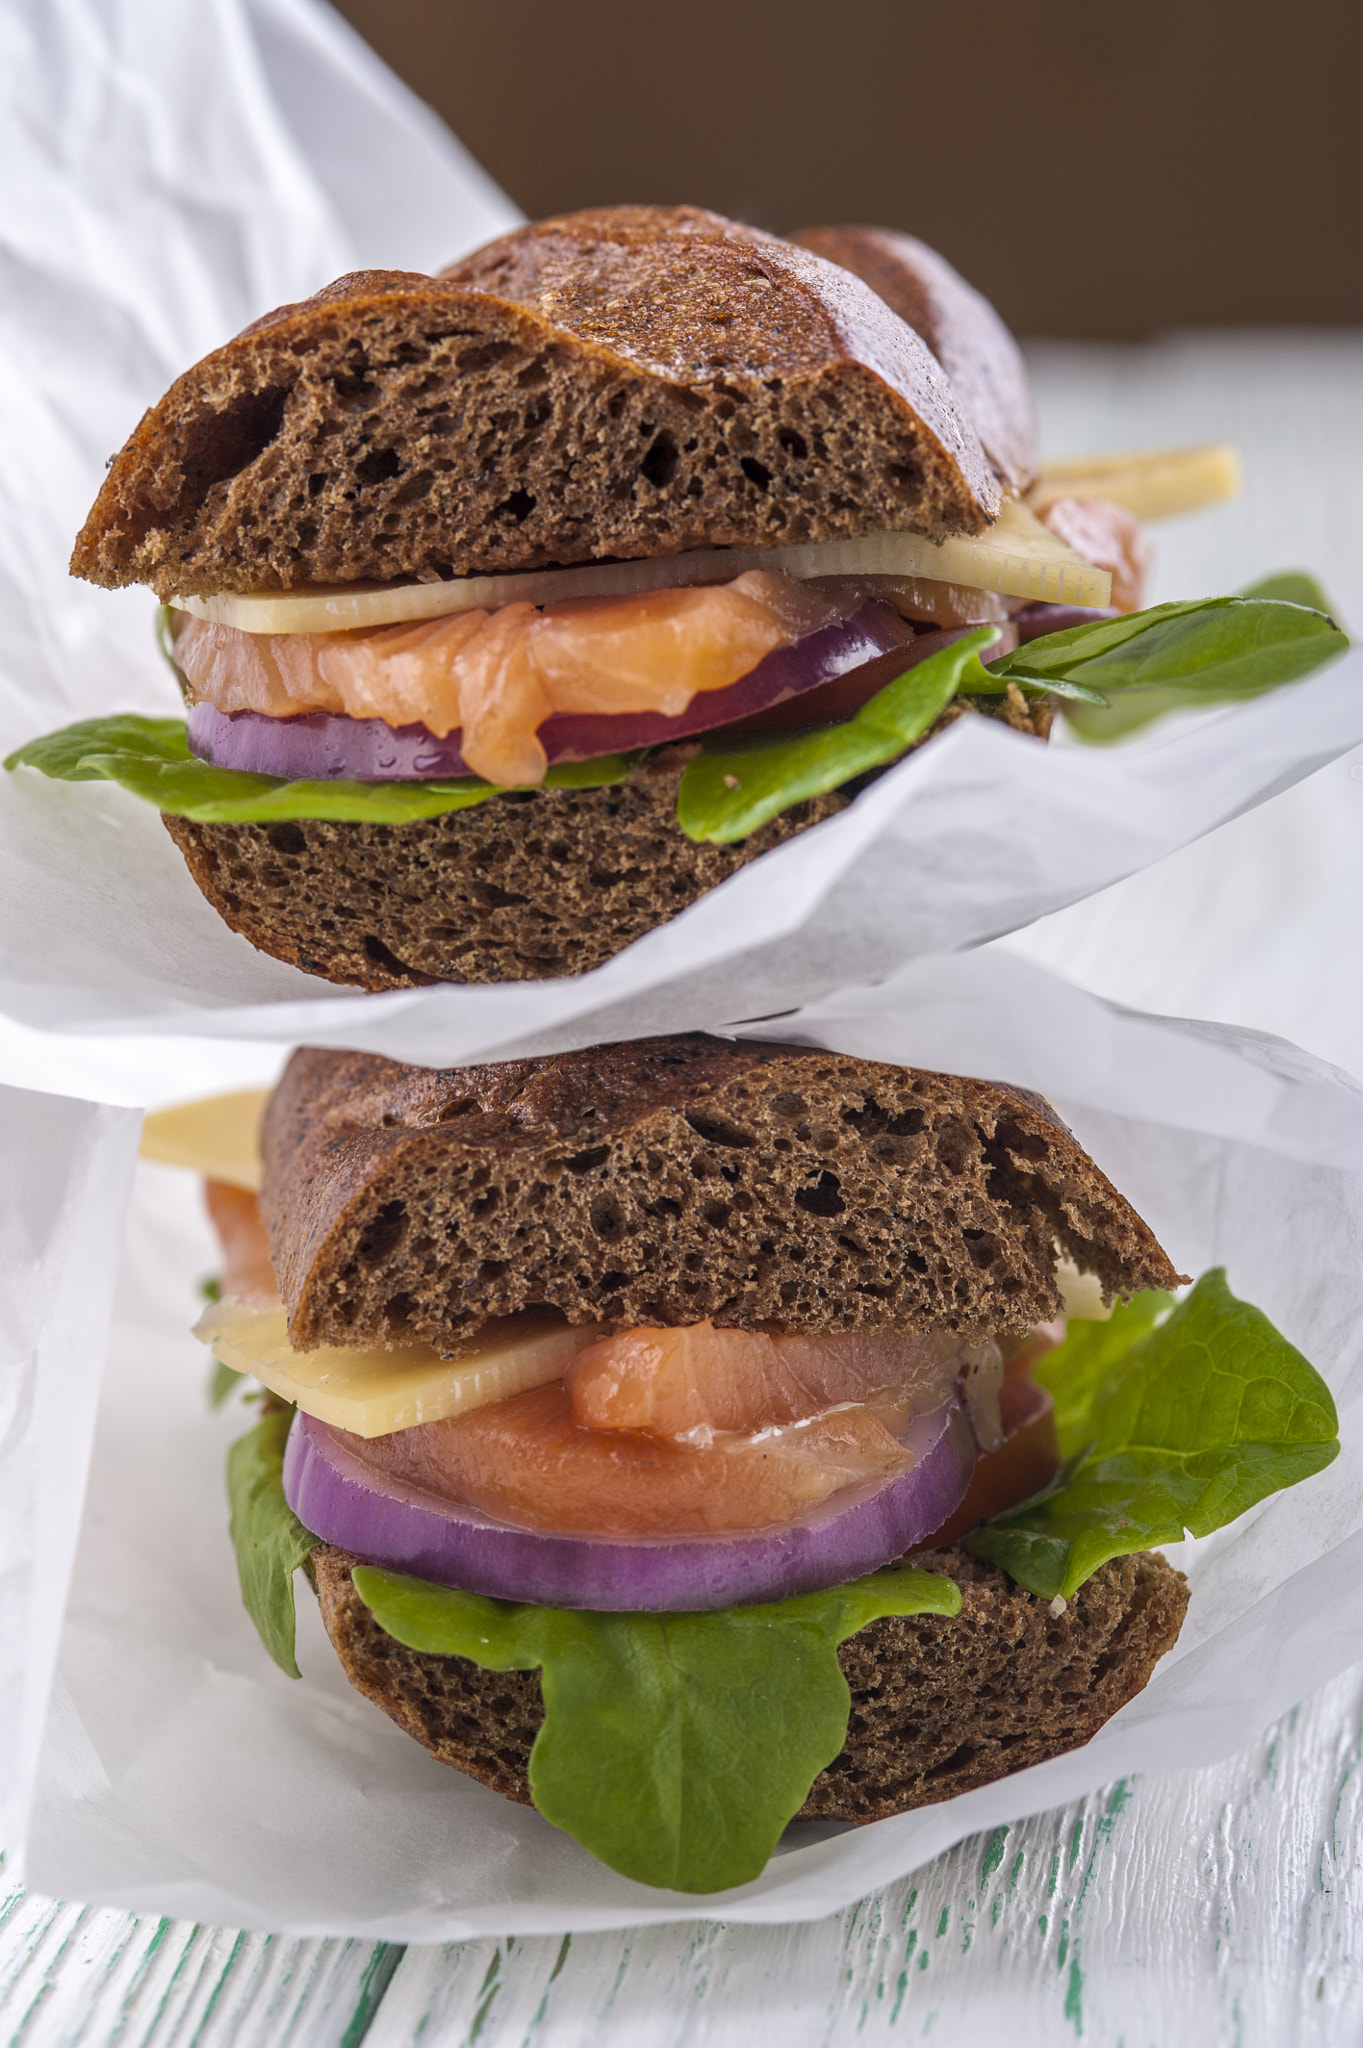 Nikon D700 sample photo. Two rye bread sandwiches with salmon, vegetables and lettuce photography